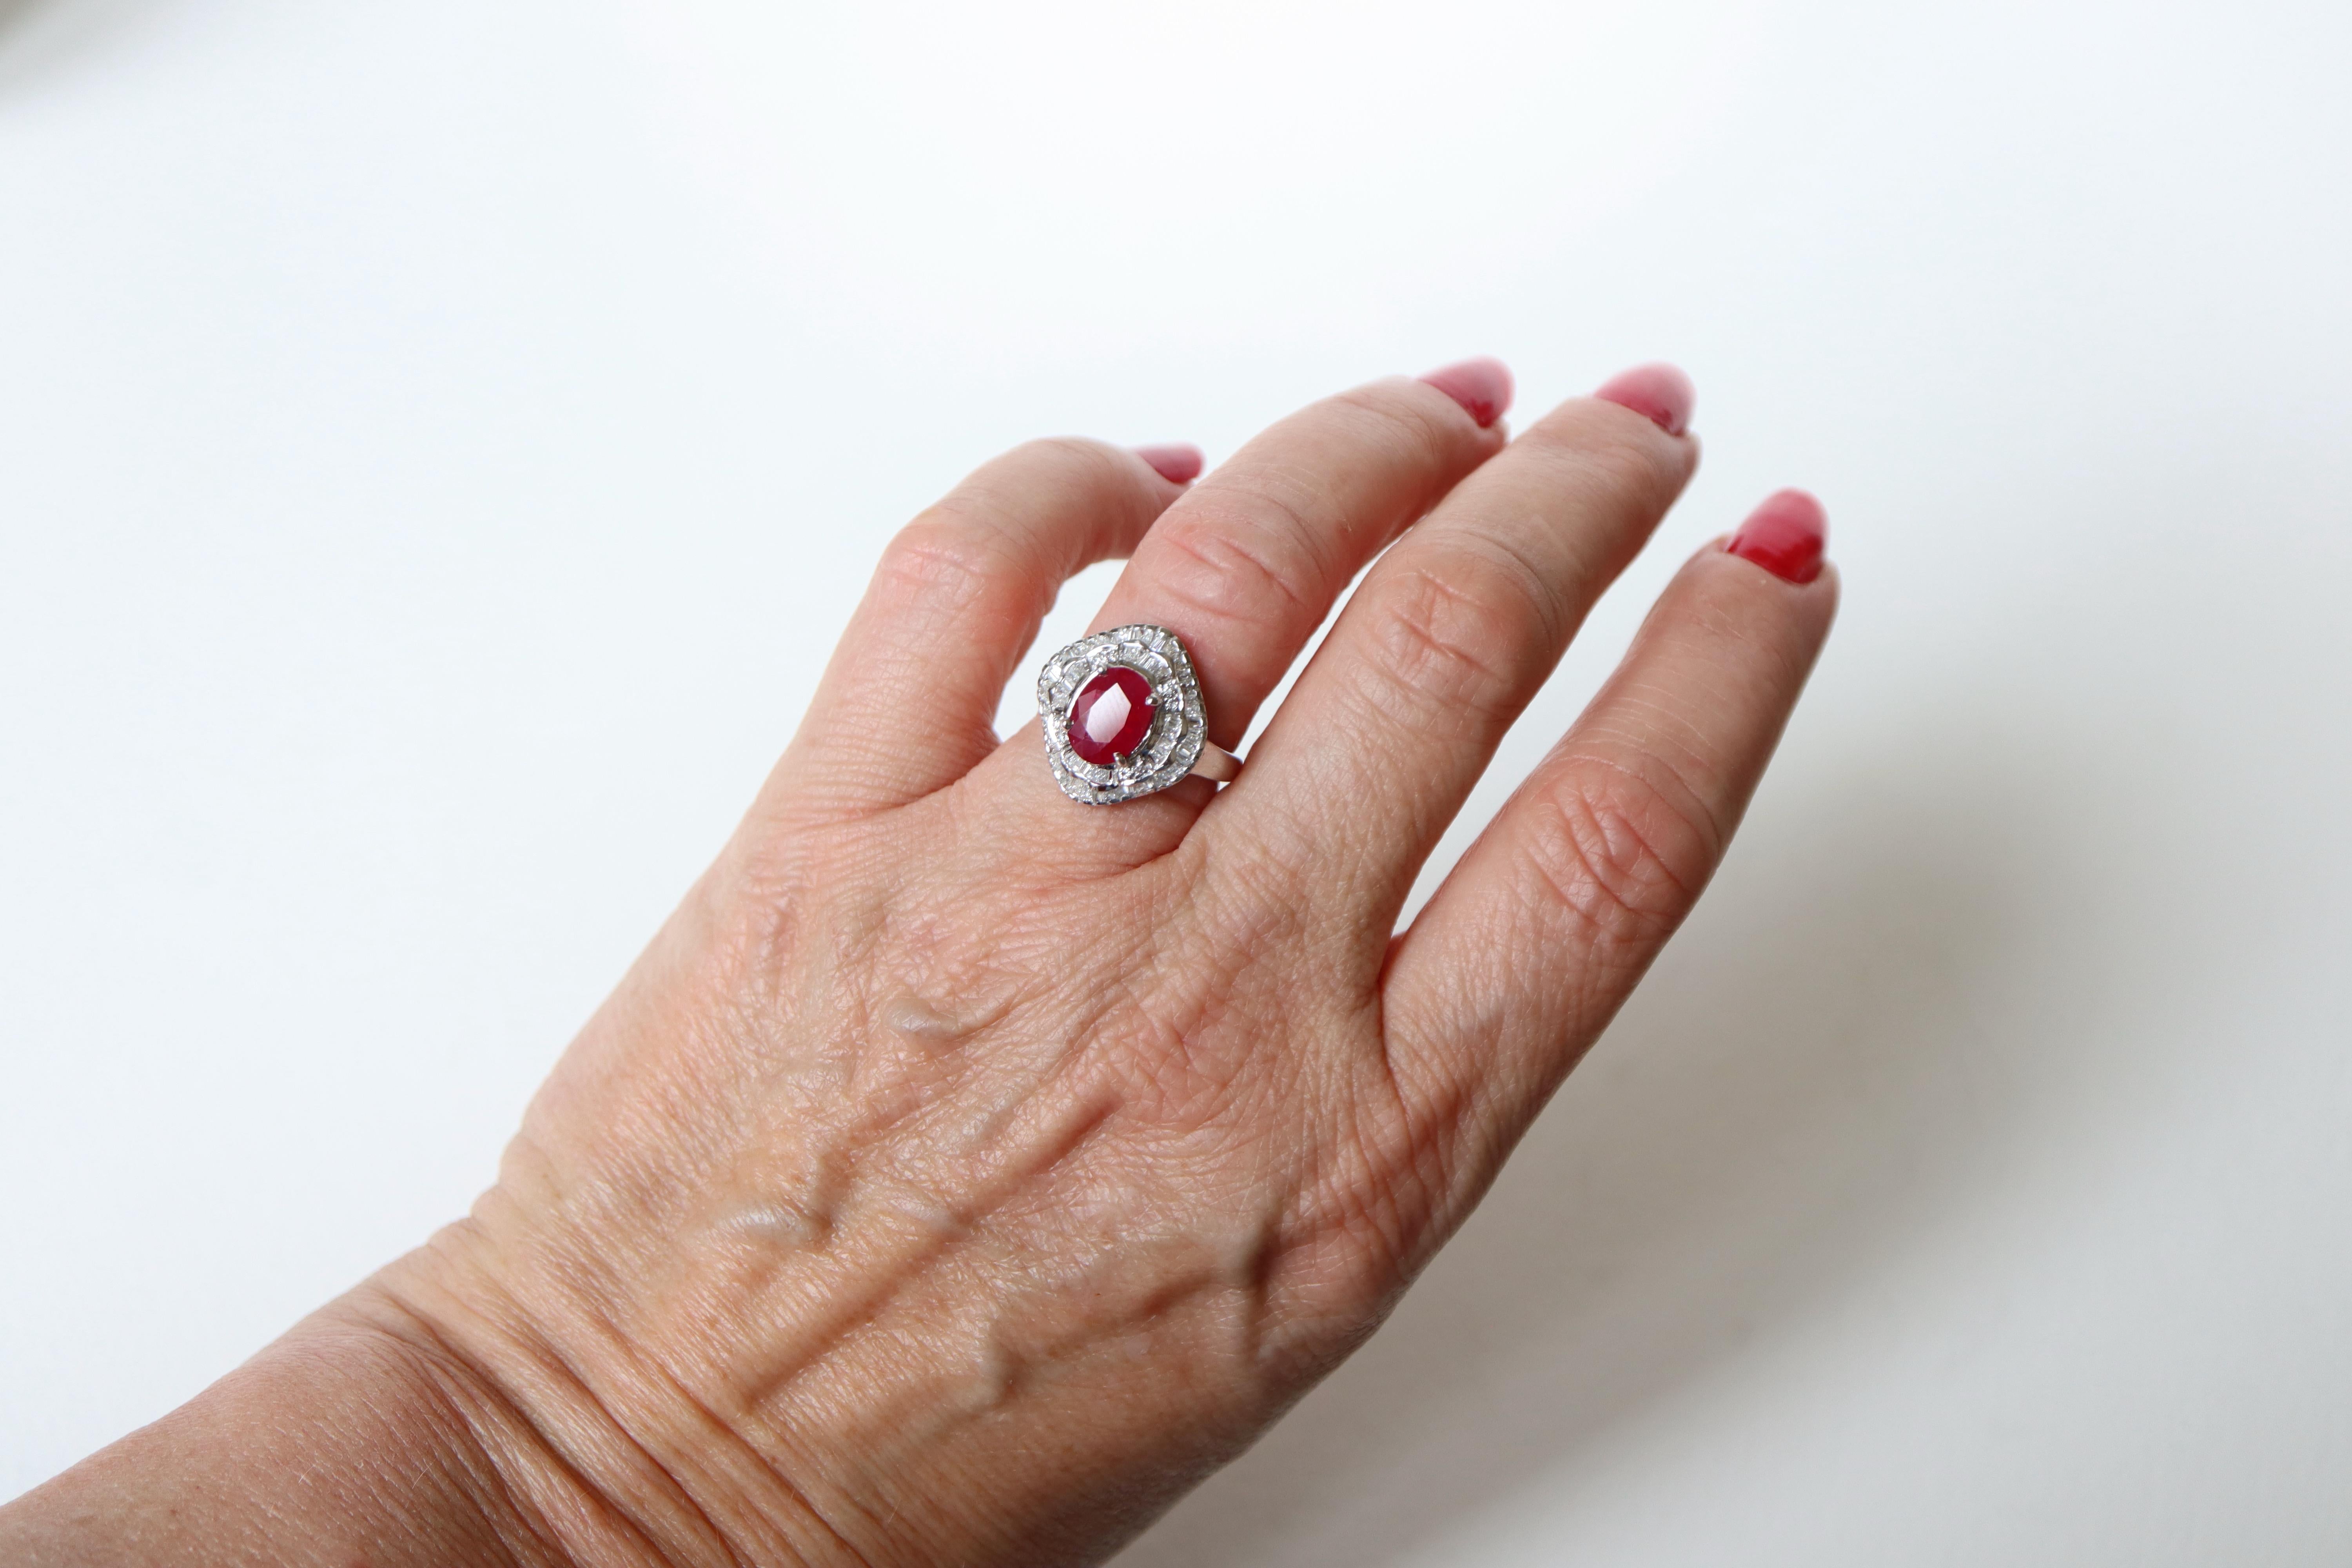 2.36 carat ruby ​​and diamond ring in 18 carat white gold in skirted shape.
18-carat white gold, ruby ​​and diamond ring holding a 2.36-carat ruby ​​in its center surrounded by Baguette, round and Taper-cut diamonds for a total weight of 0.70